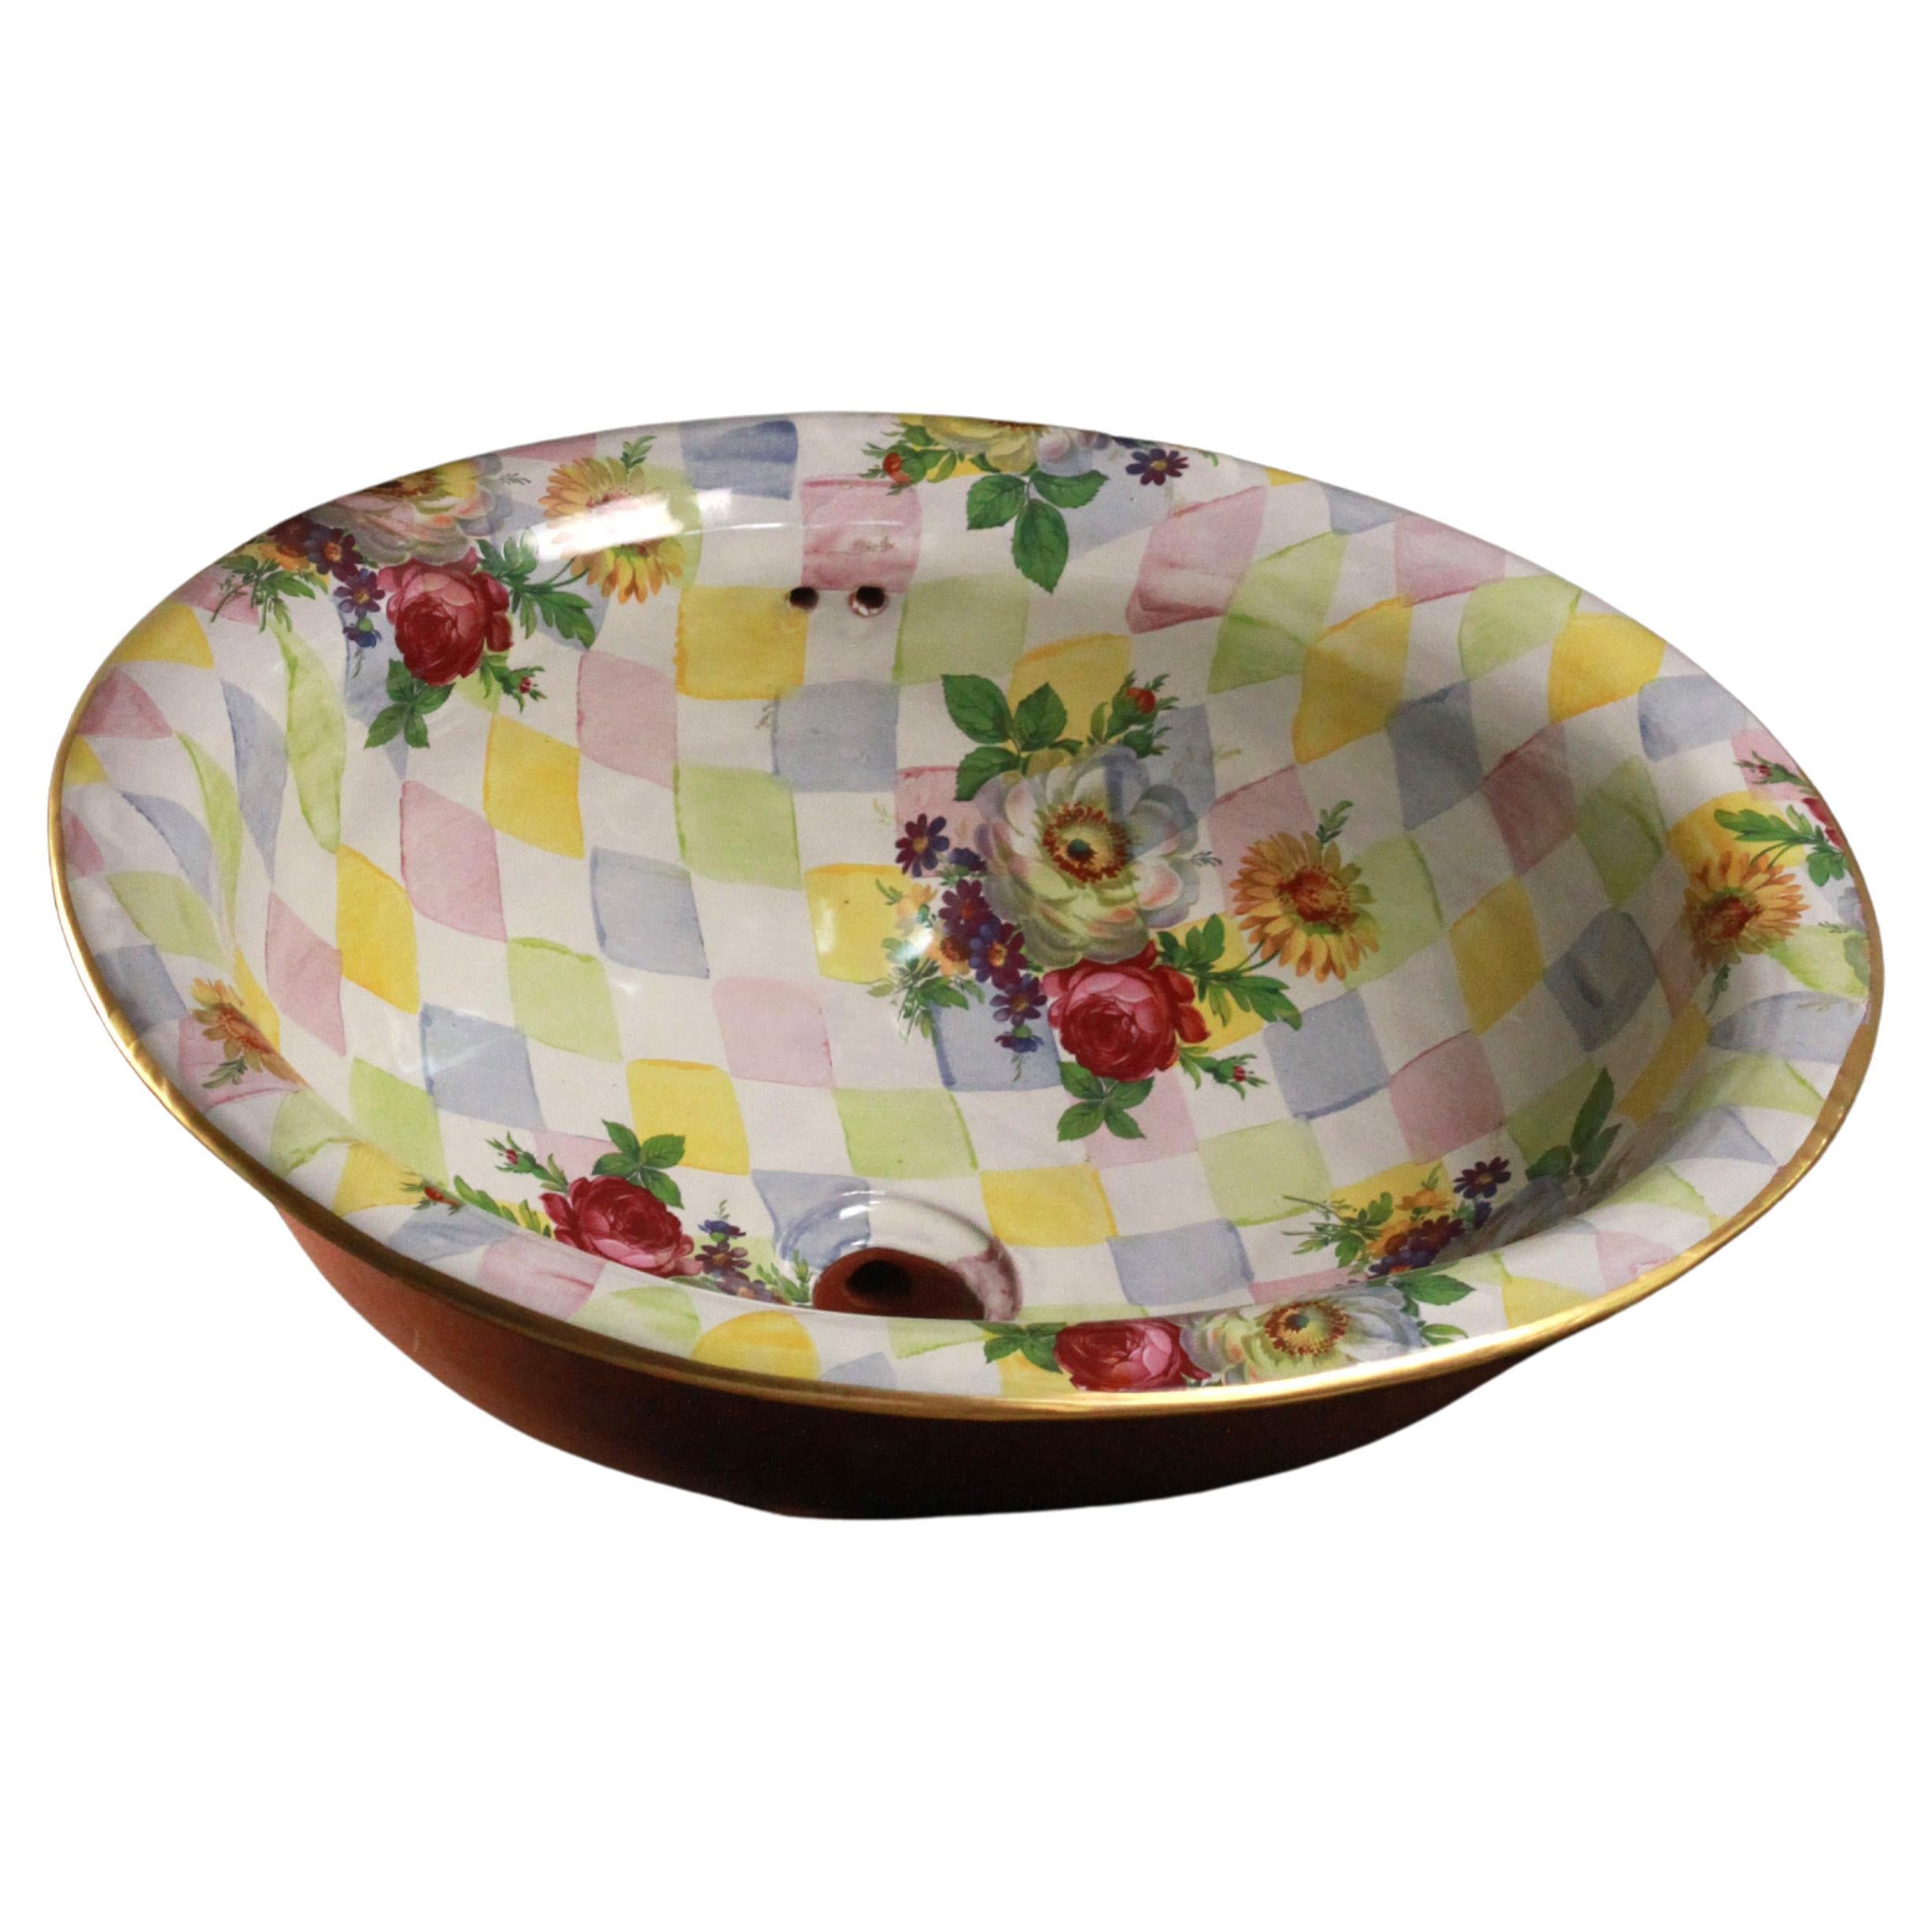 MacKenzie-Childs Floral Sink with Tiles For Sale